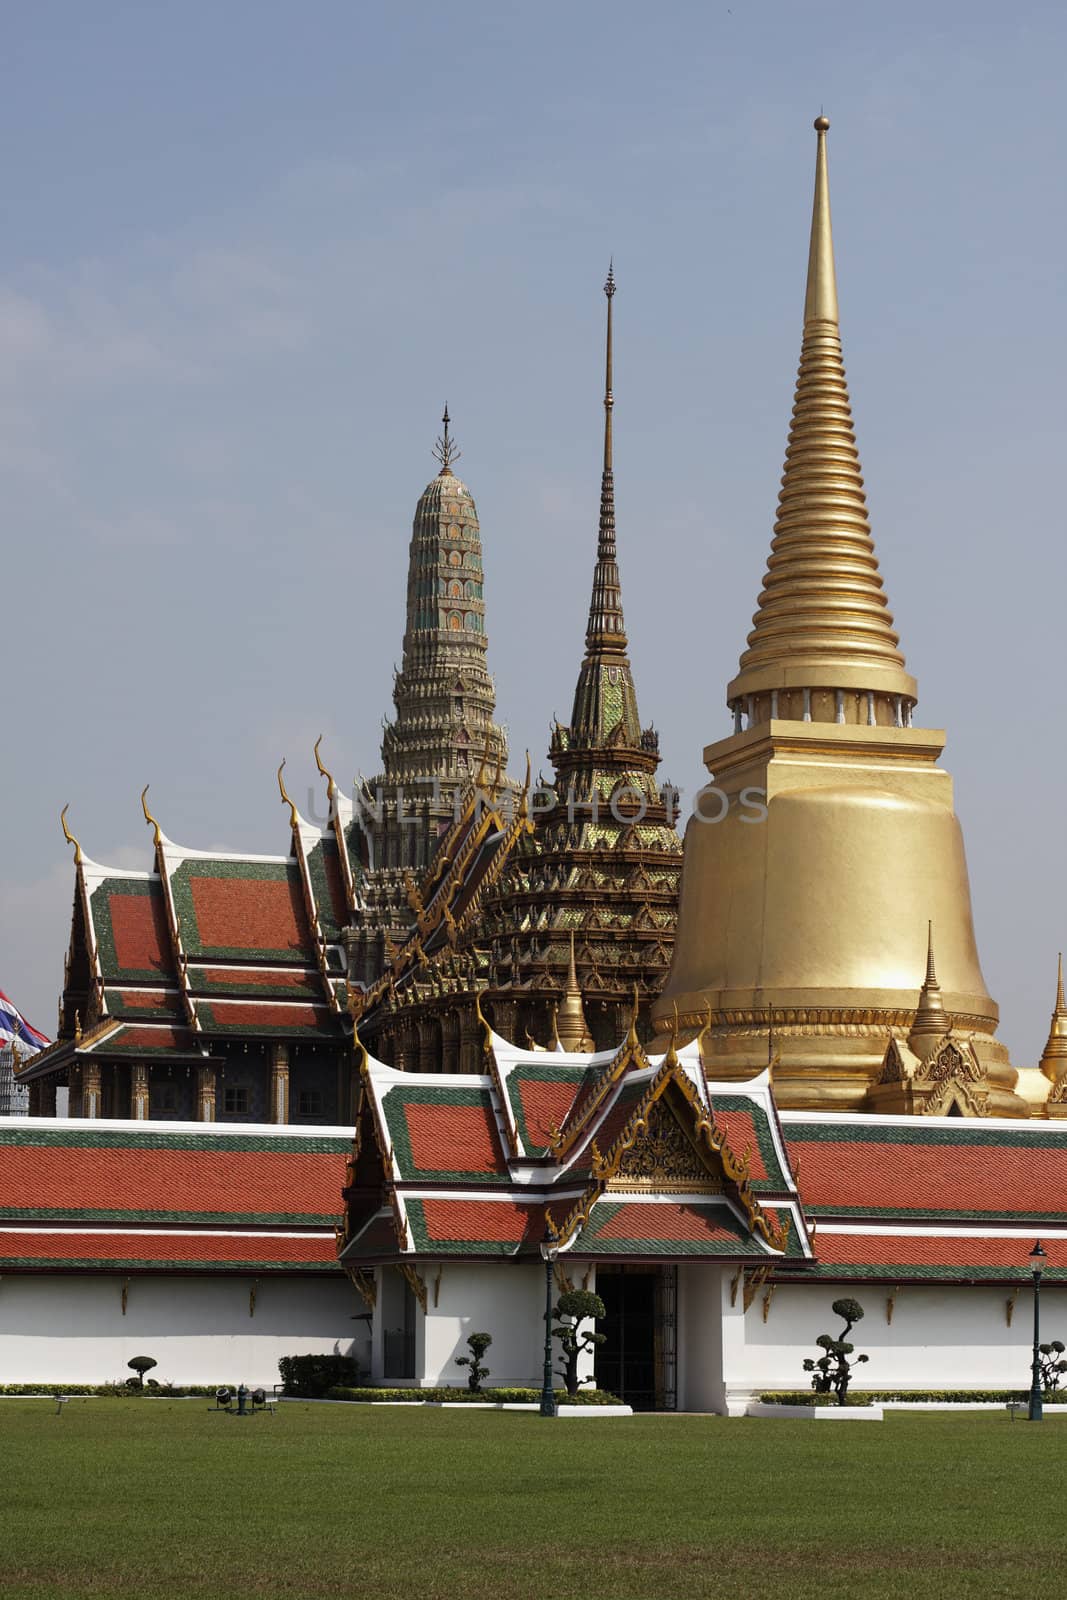 THAILAND, Bangkok, Imperial City, view of the golden dome